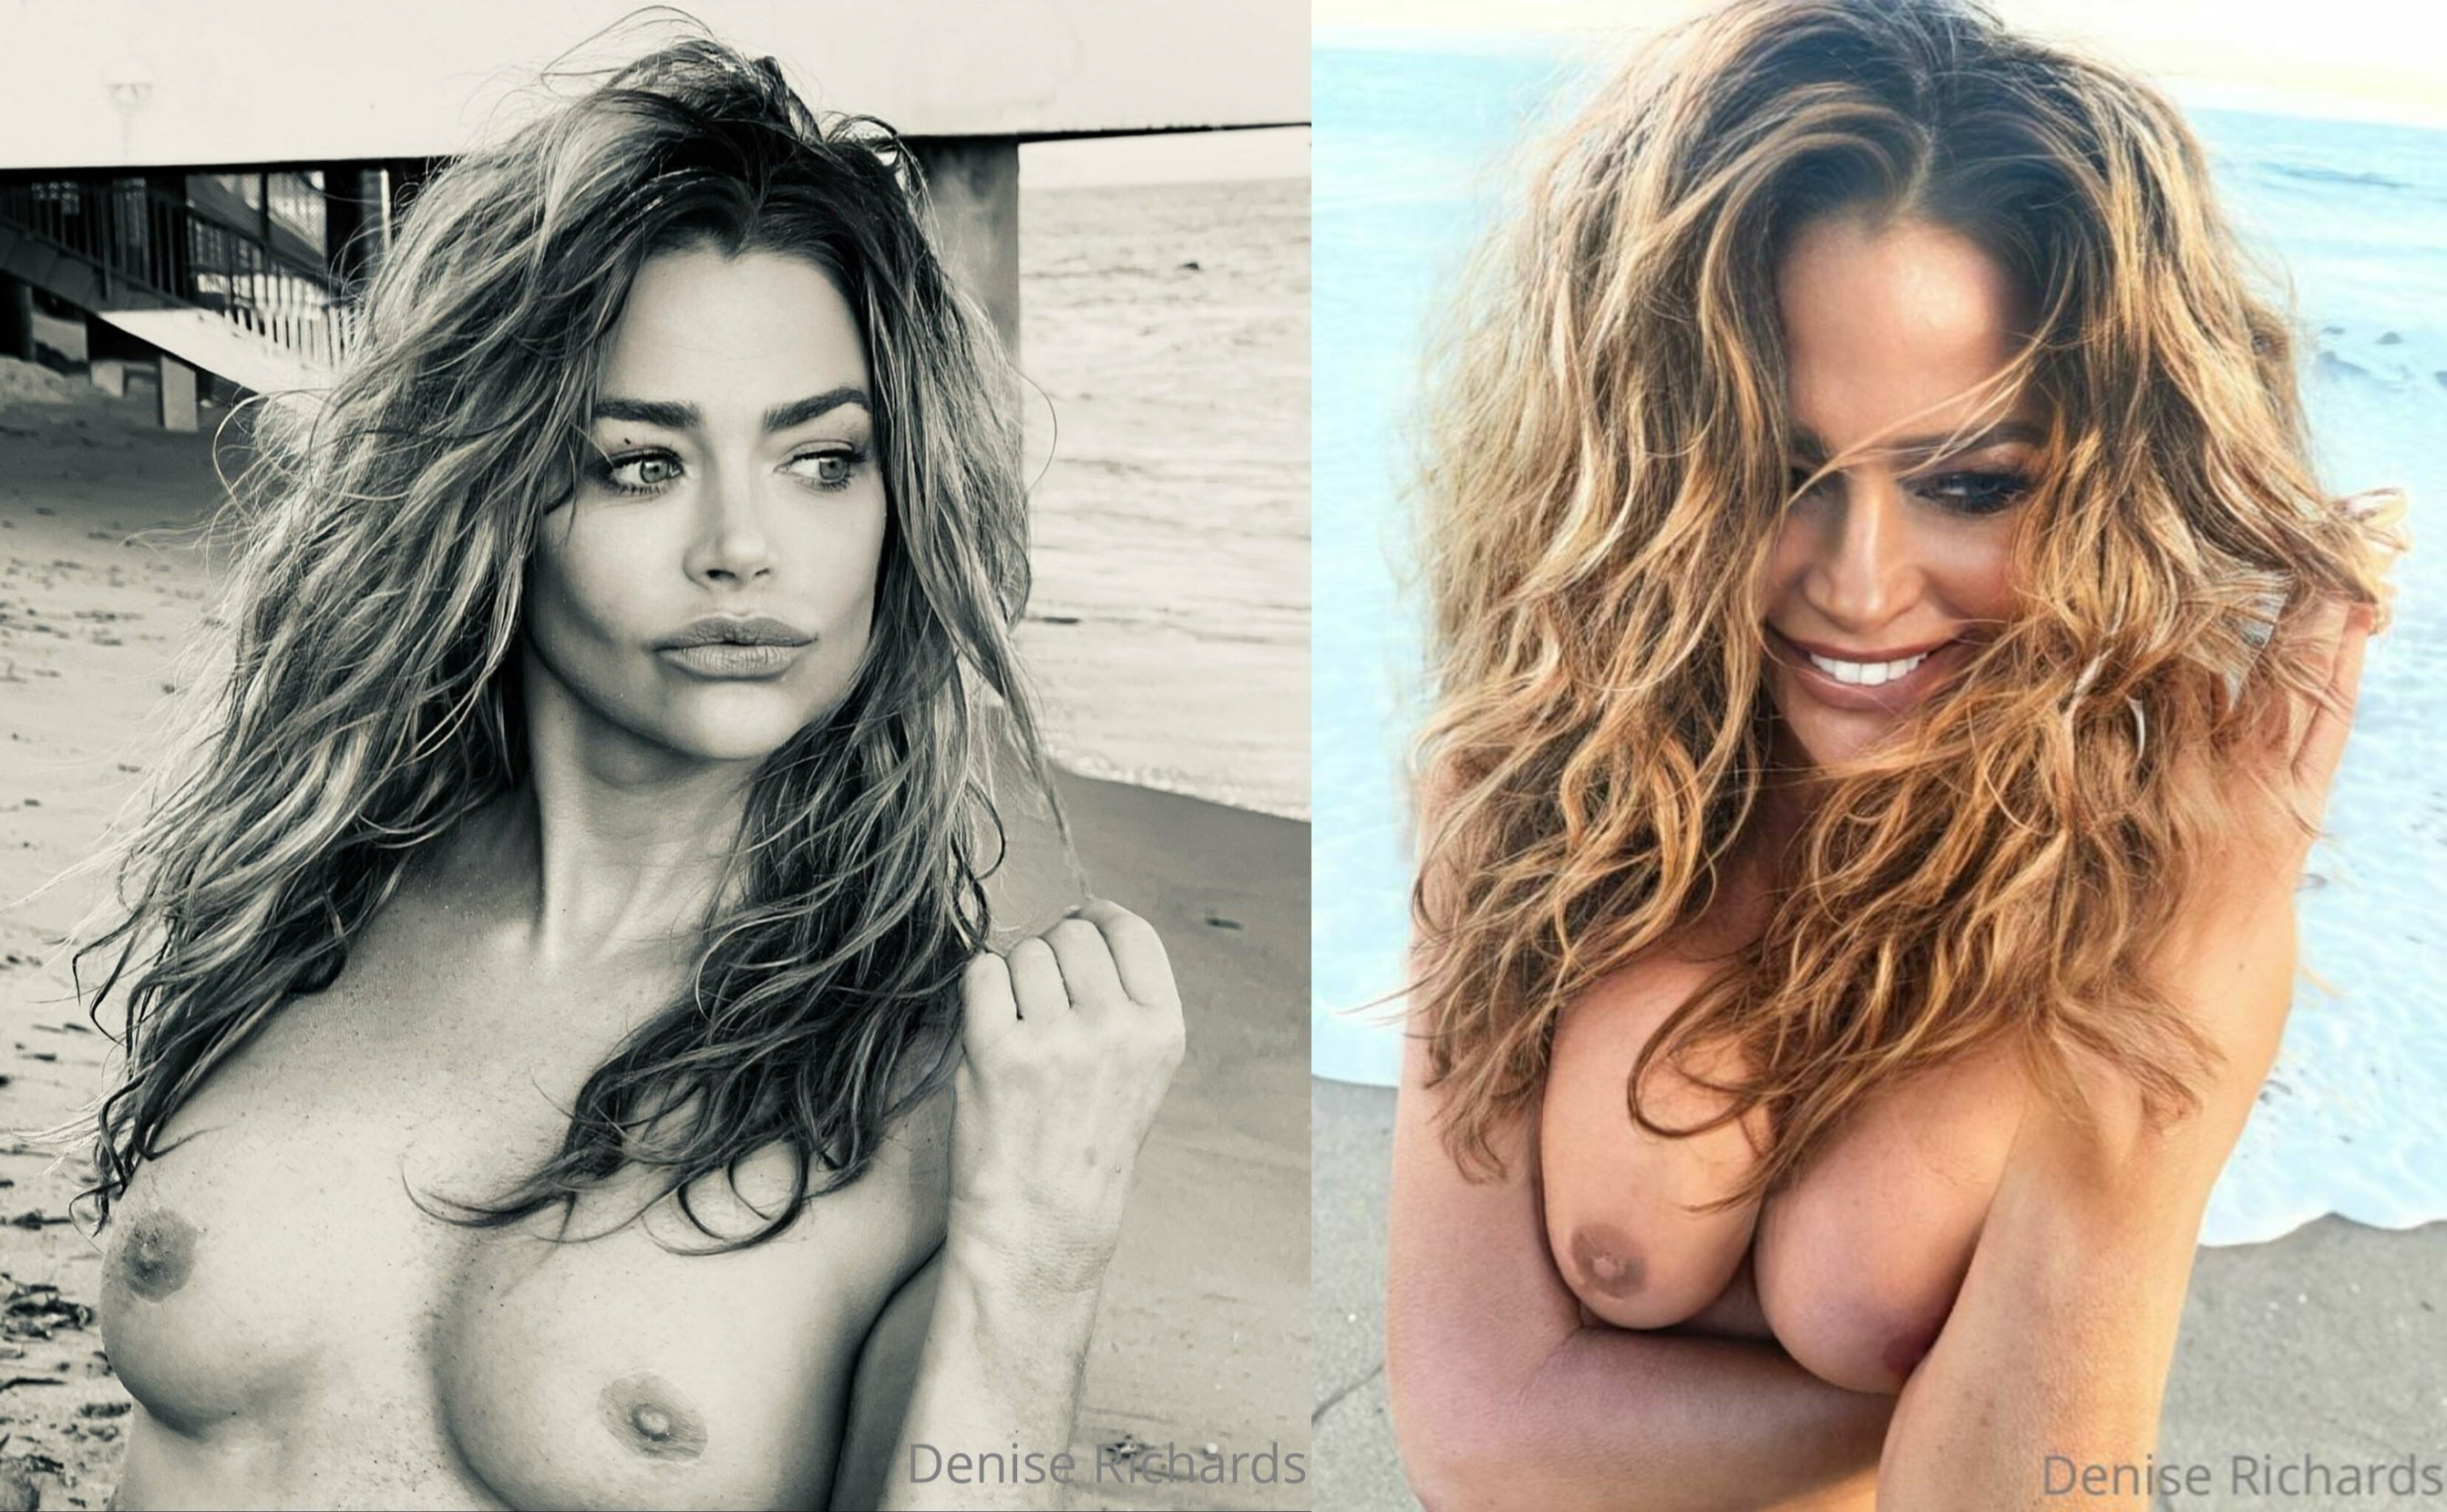 deb phelan recommends Has Denise Richards Ever Been Nude